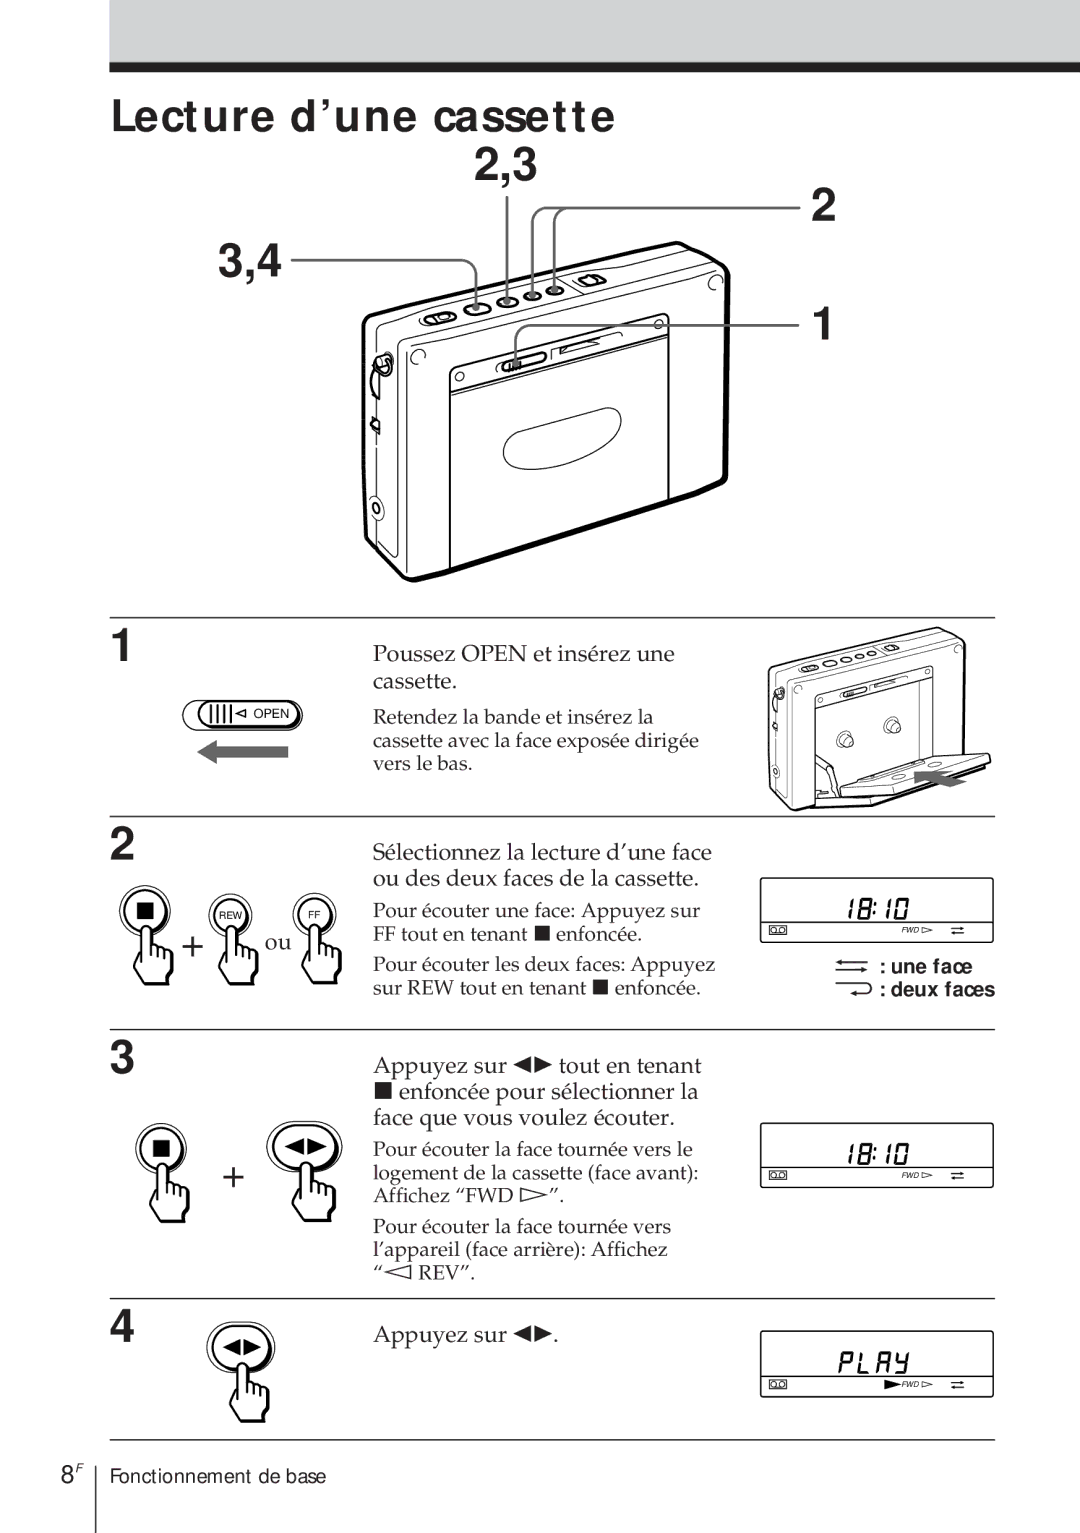 Sony ICF-SW1000TS operating instructions Lecture d’une cassette 